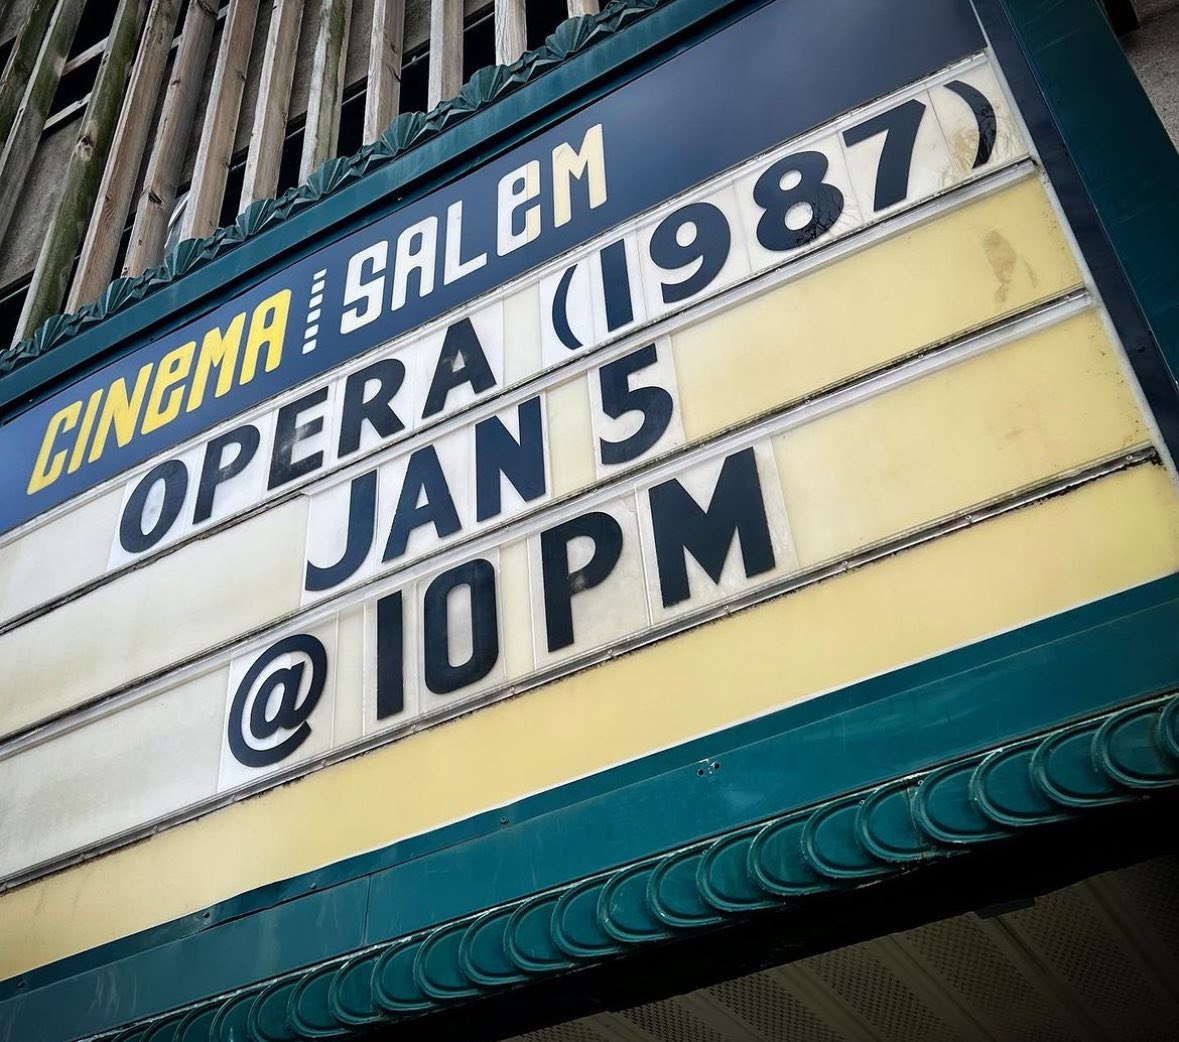 Our restoration of DARIO ARGENTO'S OPERA will be screening tonight at @cinemasalem in Salem, MA. as part of Cinematic Void's January Giallo. Presented by @salemhorrorfest